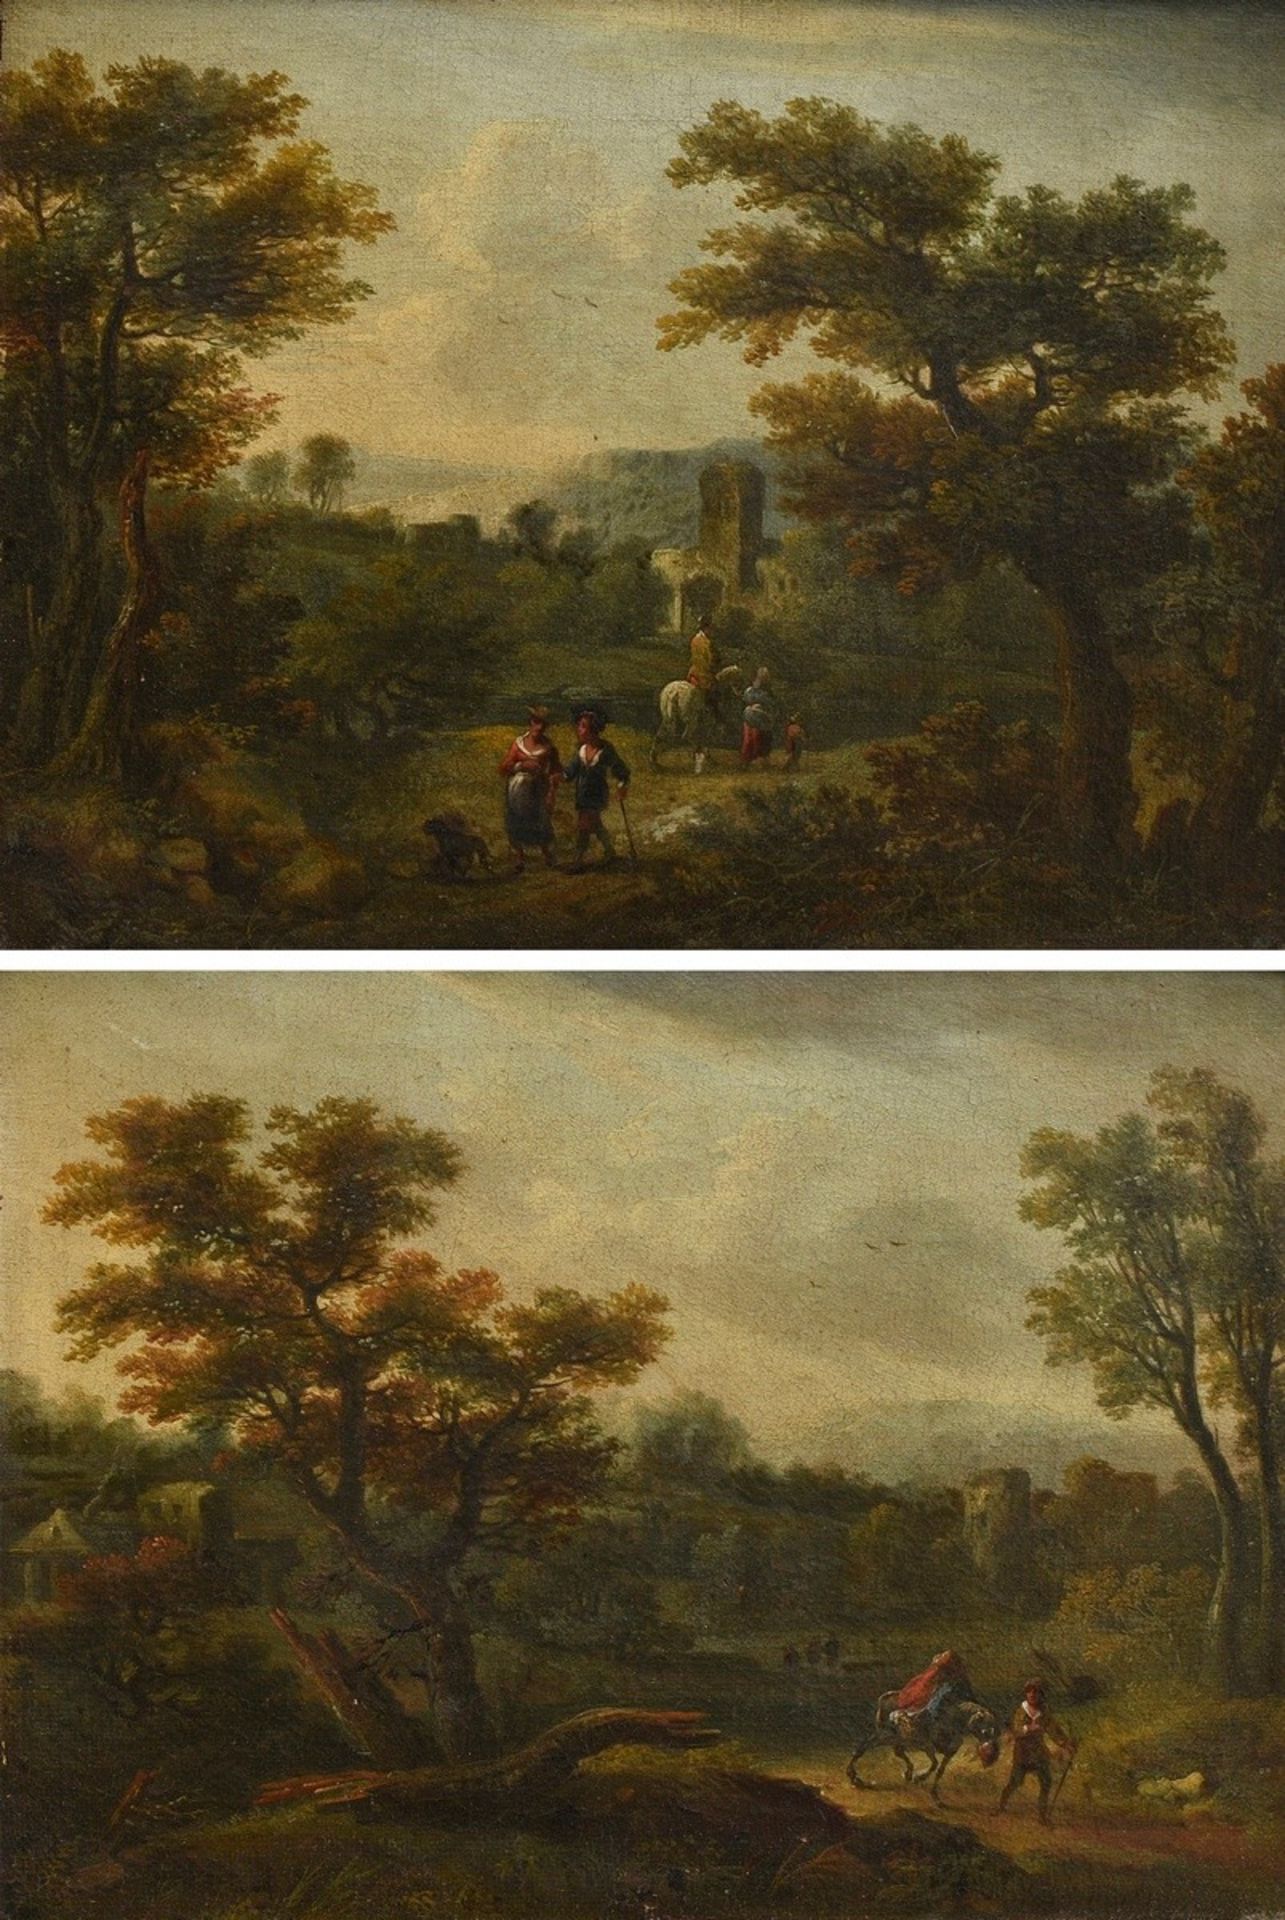 Pair of paintings by an unknown artist of the 18th c. "Landscapes with staffage of persons", oil/ca